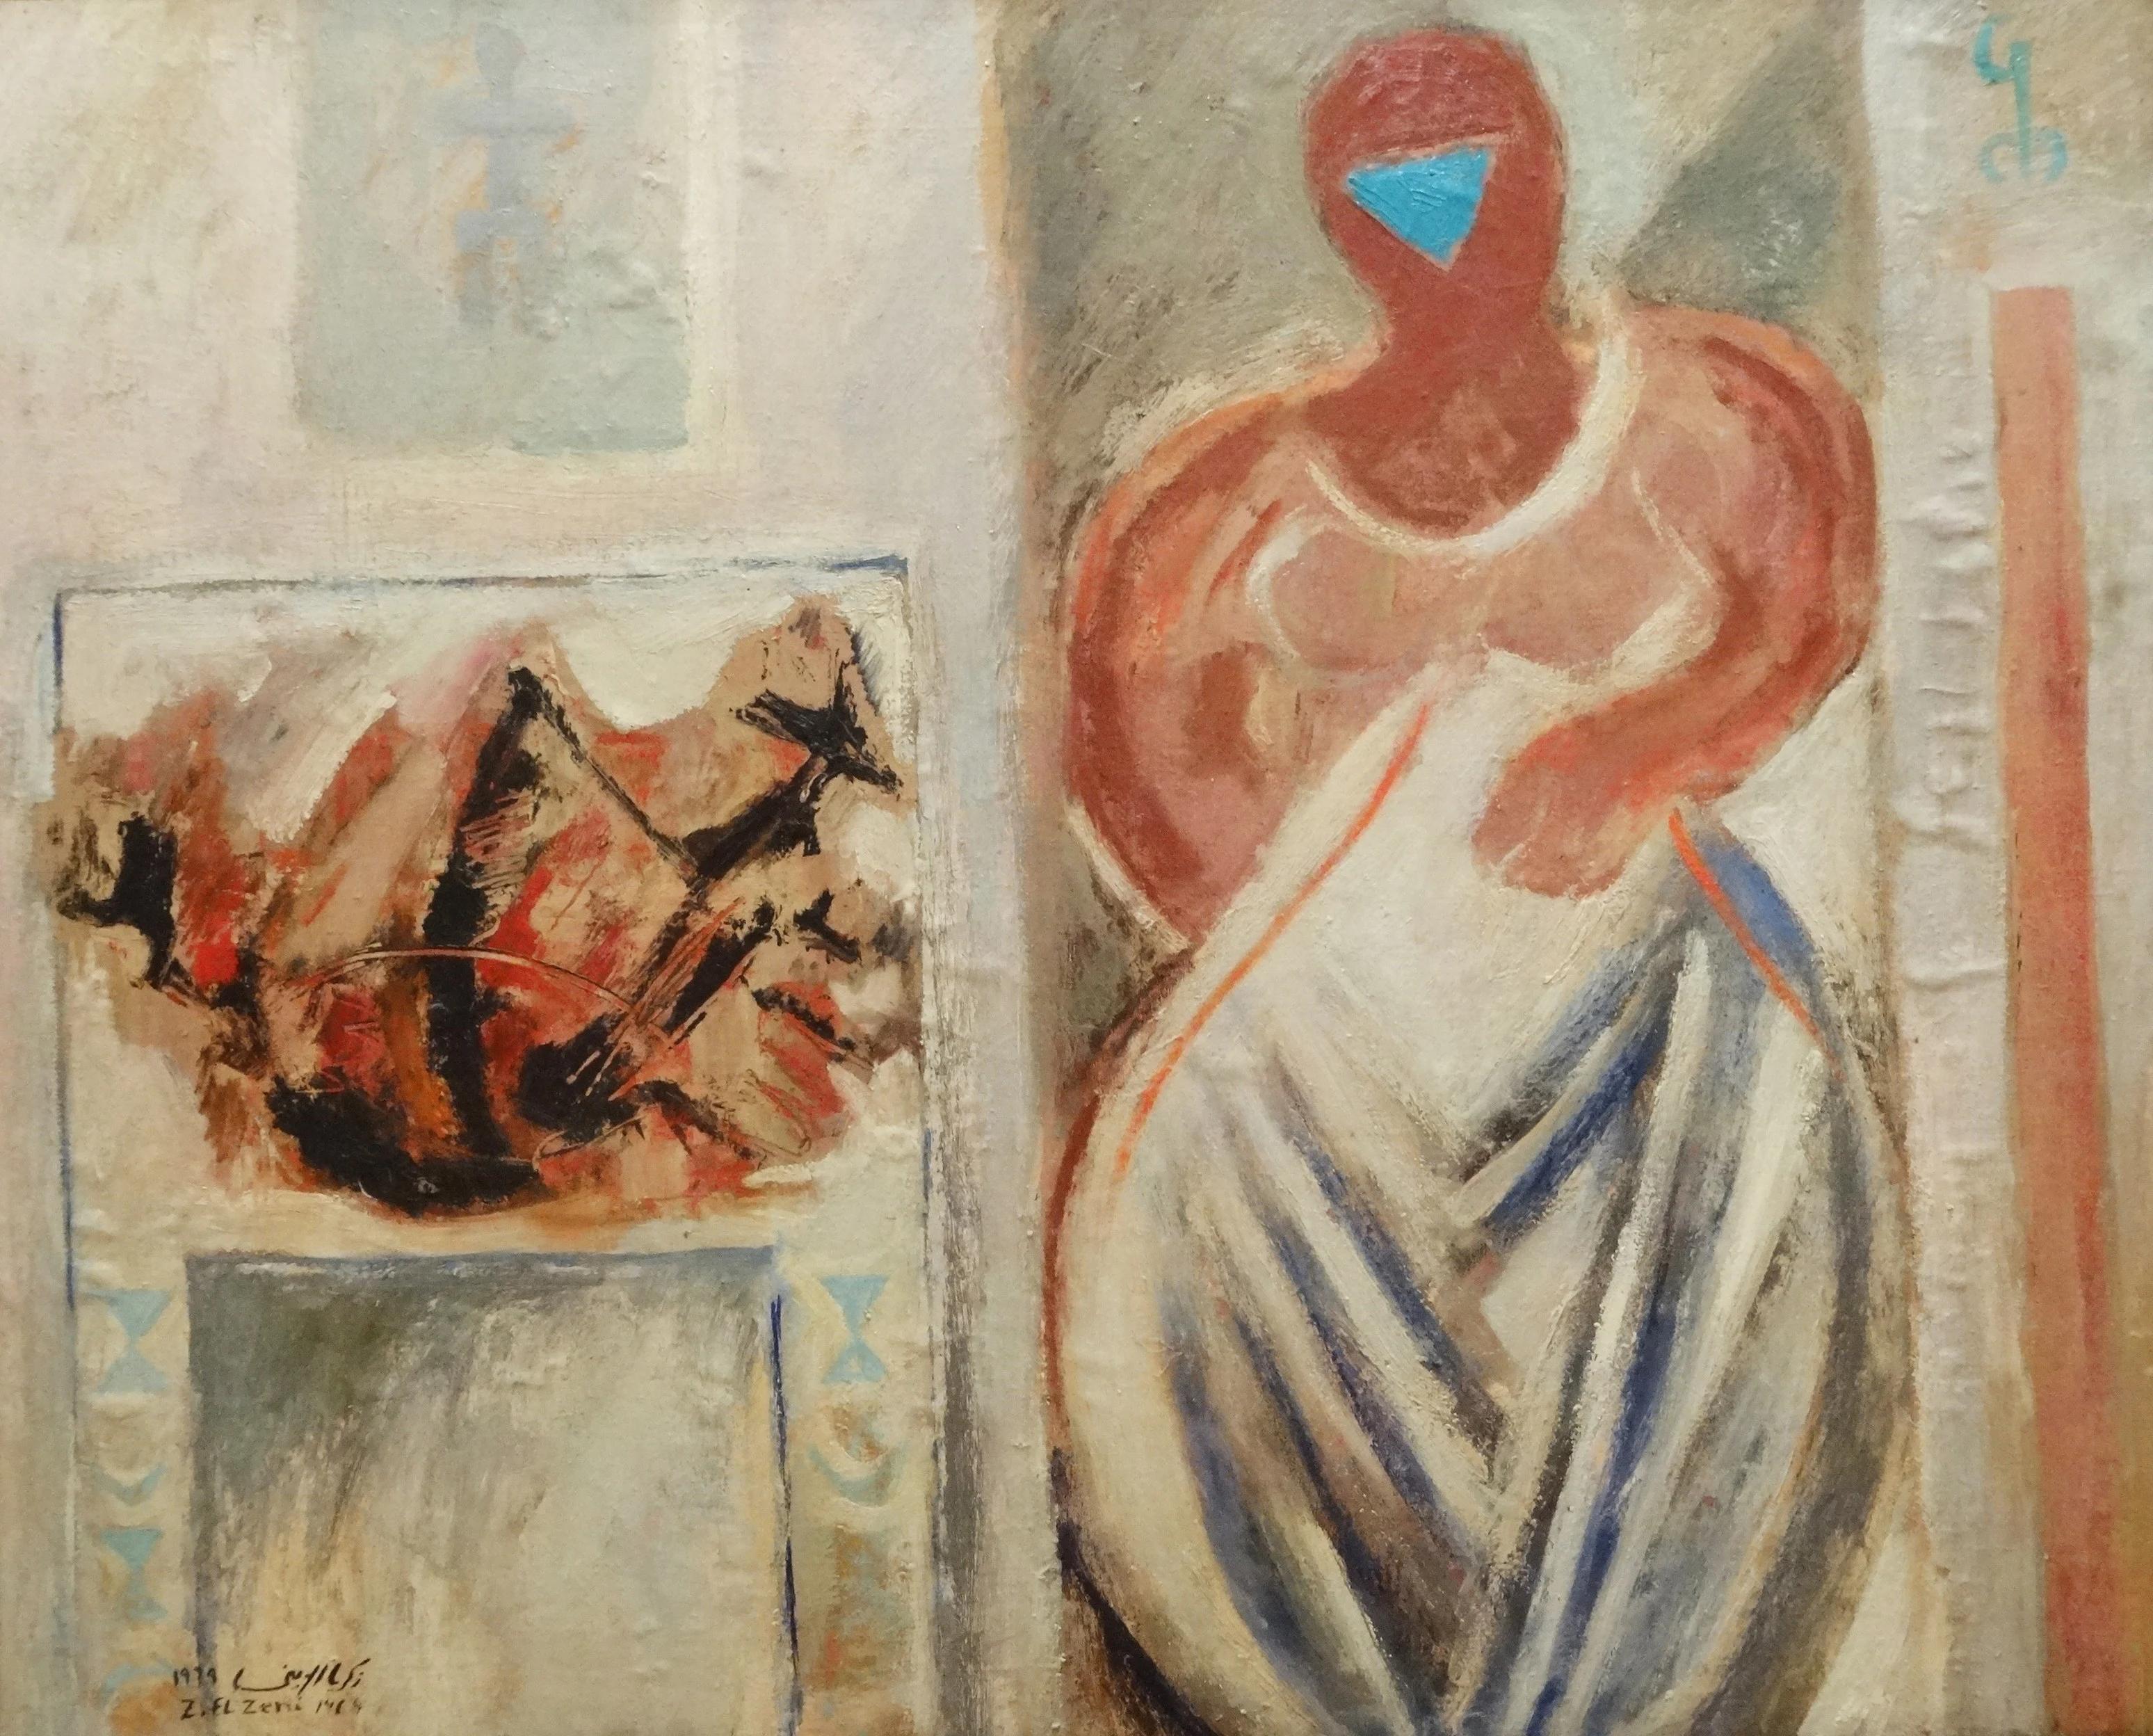 "Sacrifice" Abstract Oil Painting 31.5" x 39" inch (1969) by Zaccaria Zeini

Medium: oil on wood
Signed and dated 

Zaccaria El Zeini (1932 - 1993) was raised in the popular district of Sayyida Zienab in Old Cairo and graduated from the Faculty of